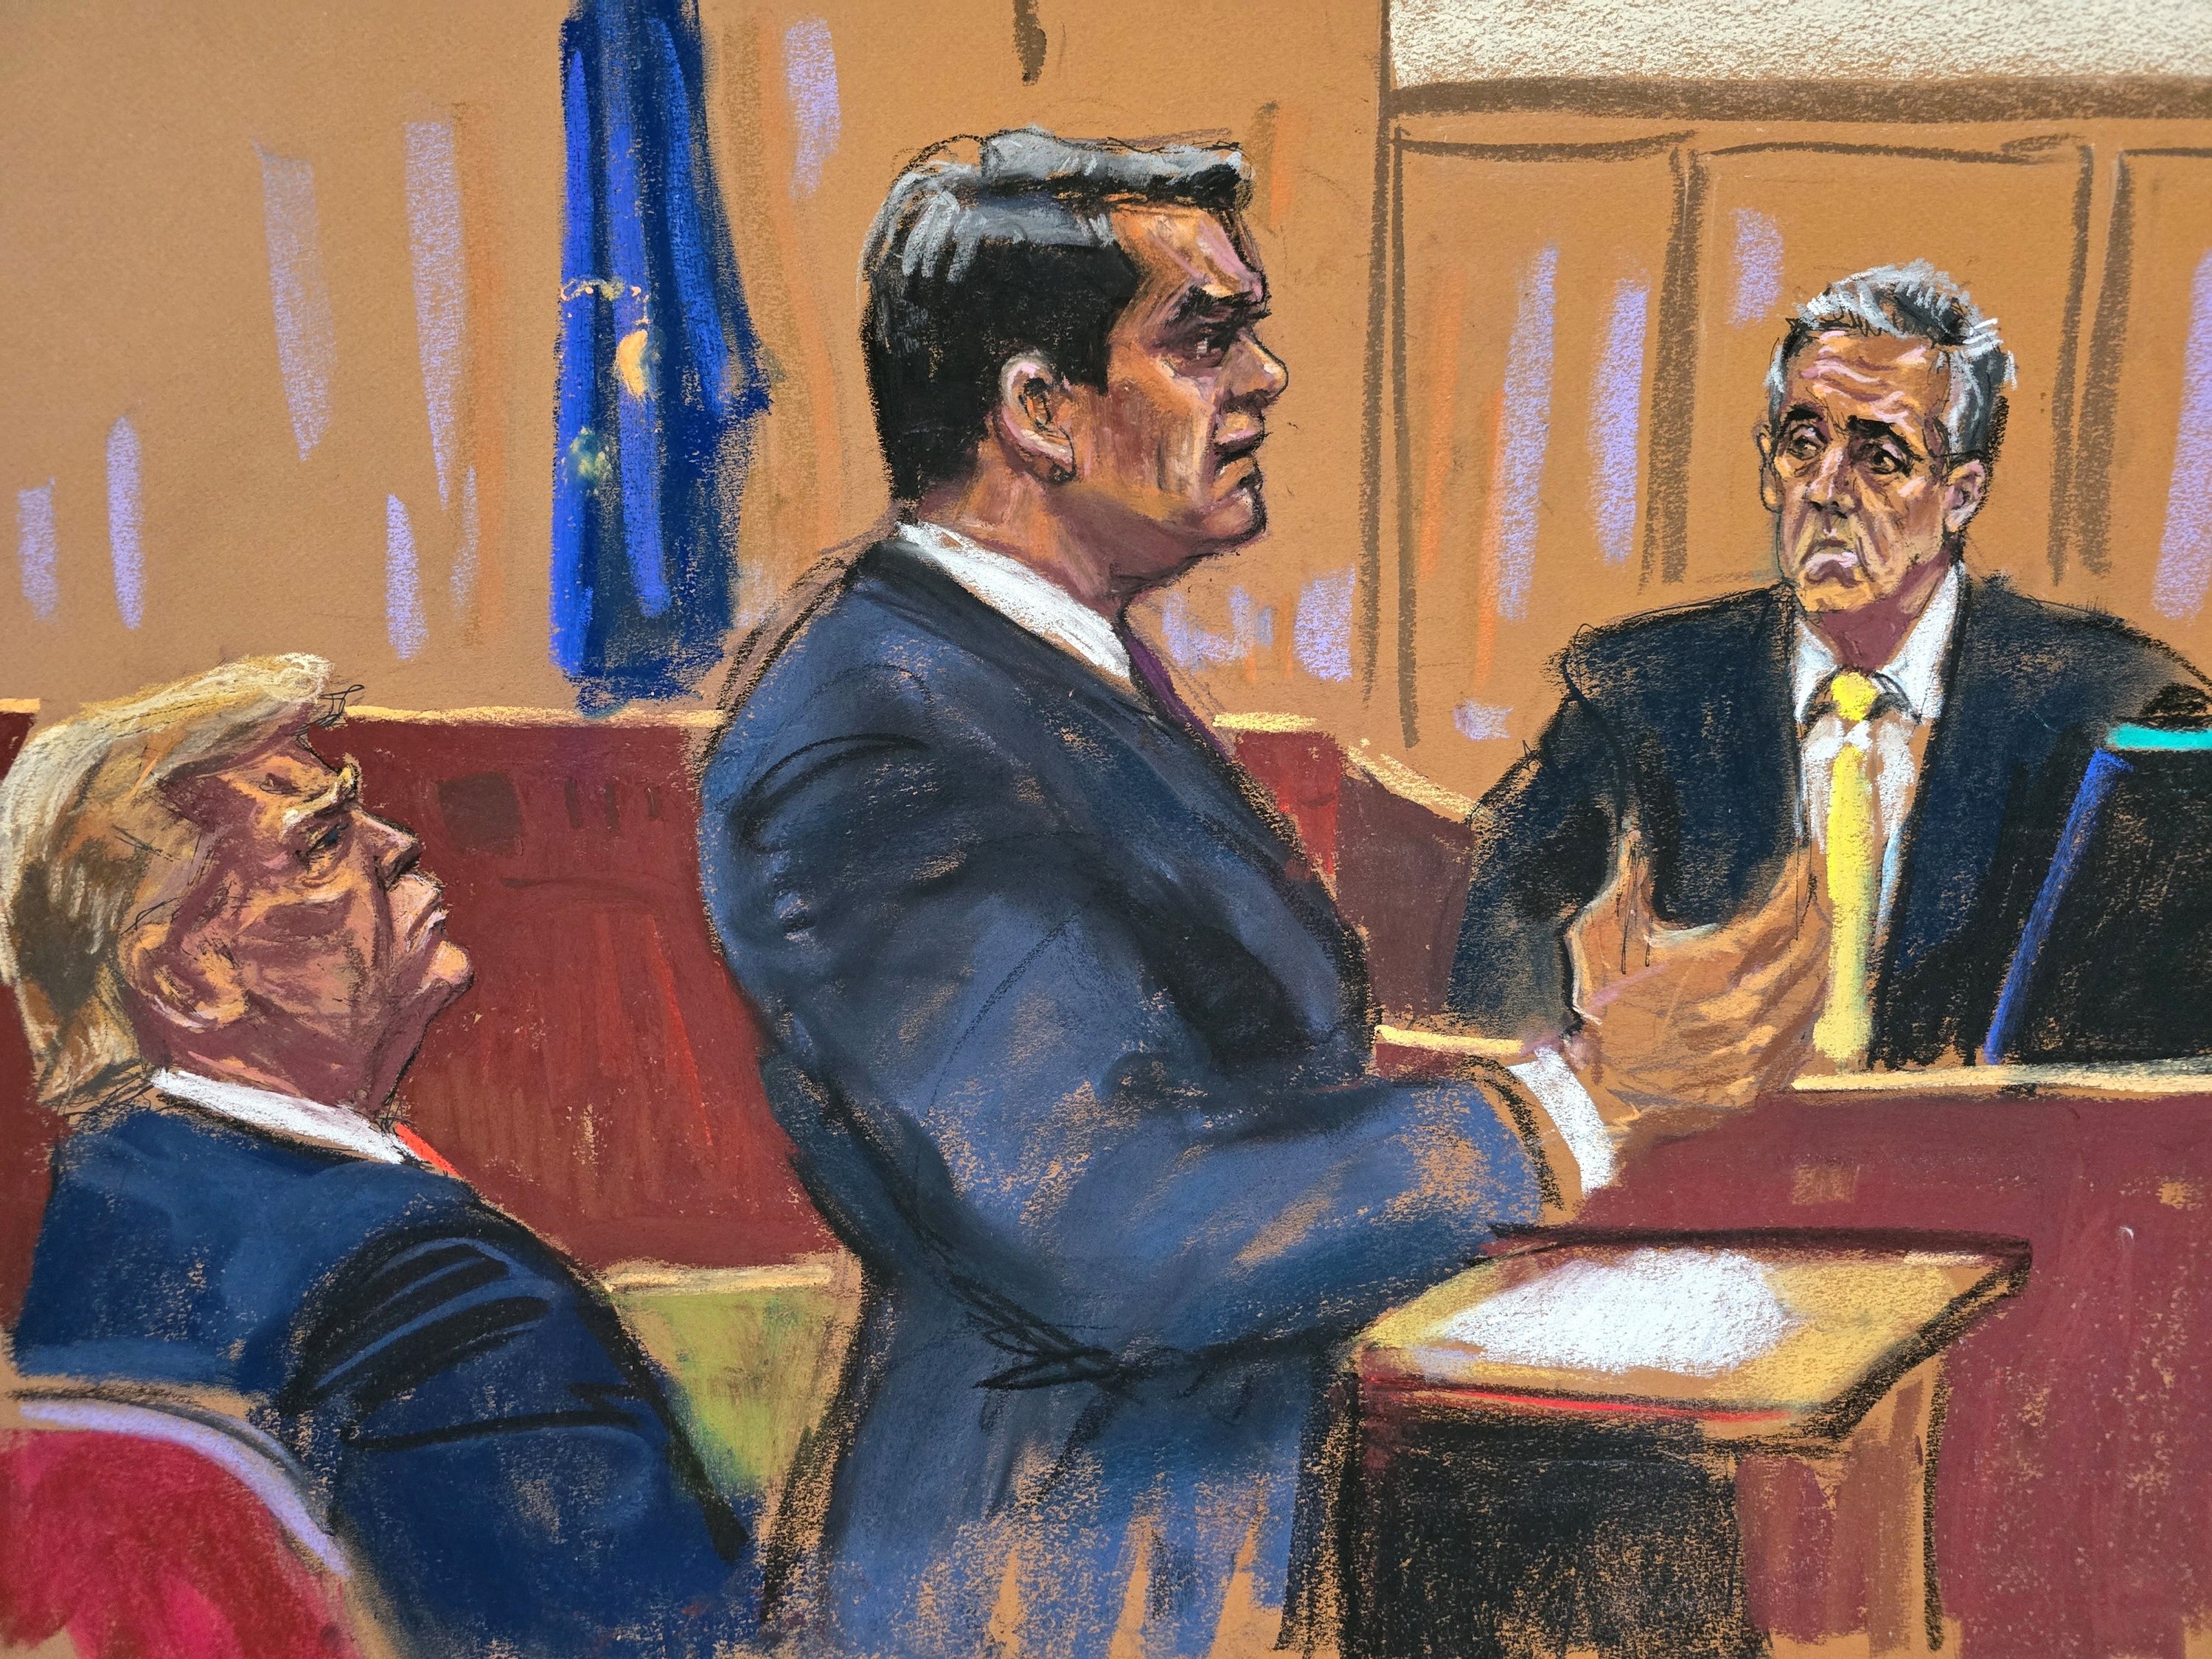 Michael Cohen is cross-examined by defence lawyer Todd Blanche during former US president Donald Trump’s criminal trial in New York on Thursday. Courtroom sketch: Jane Rosenberg via Reuters